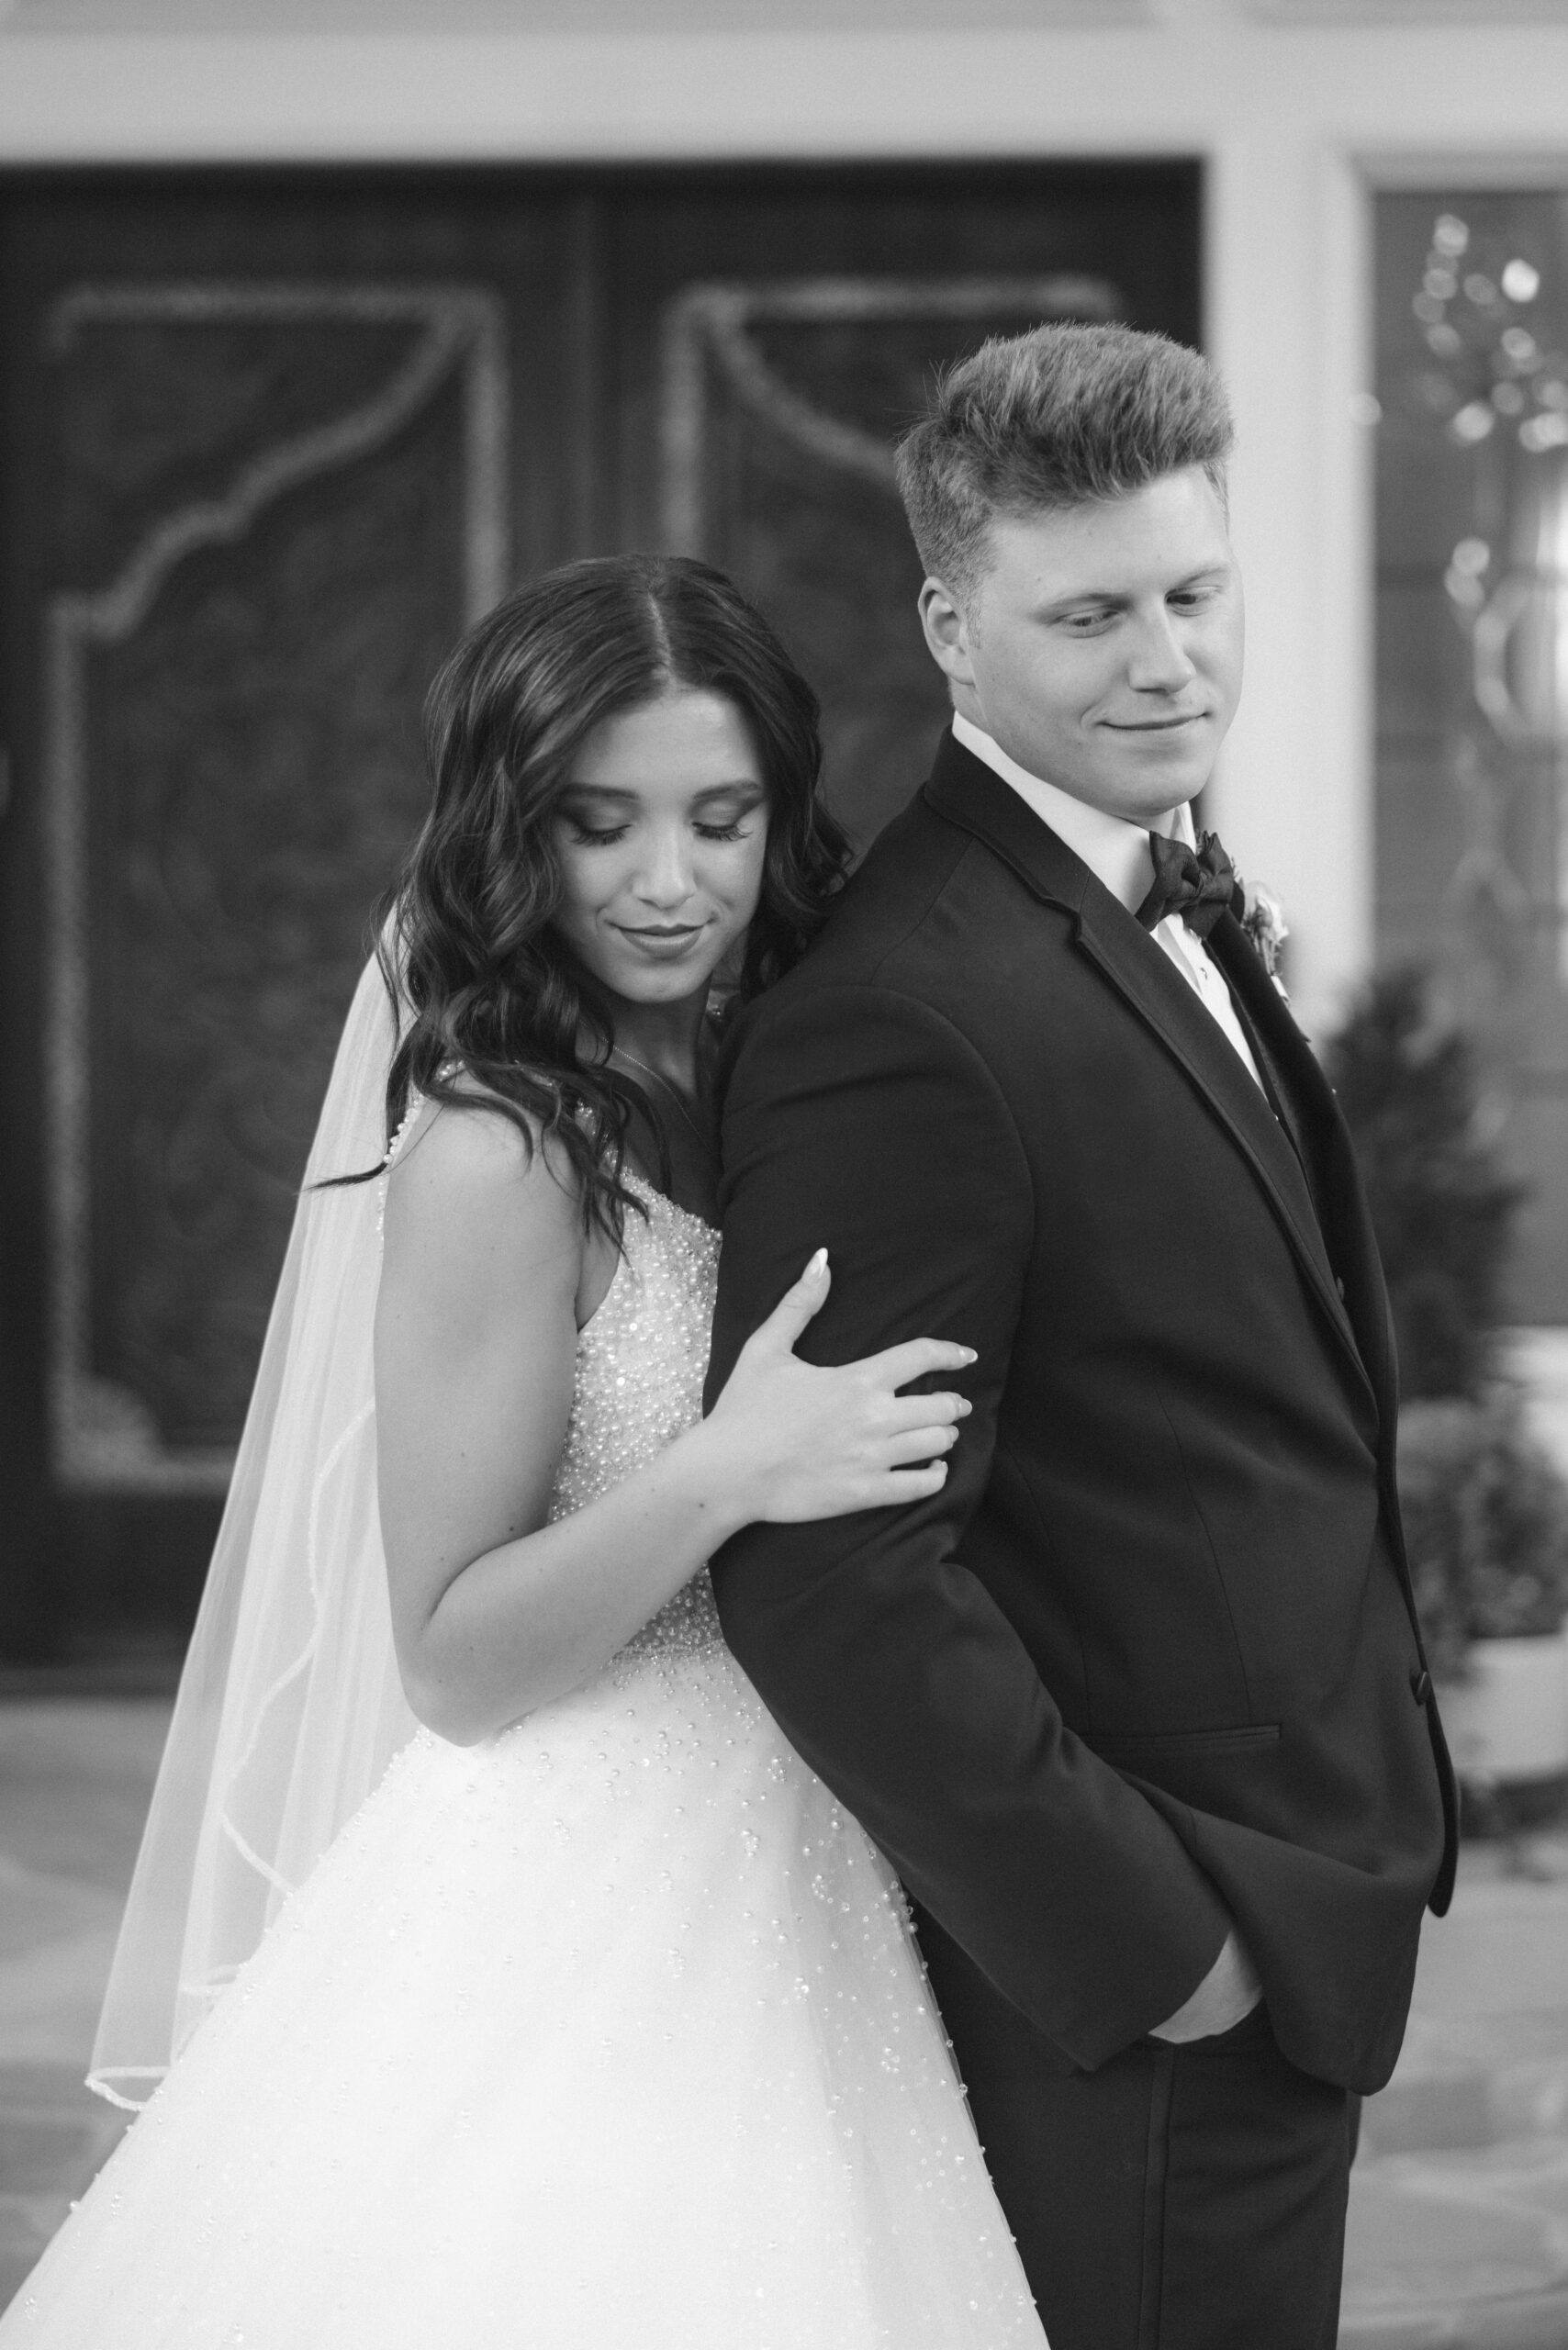 Black and white bride and groom photo photographed by Tatyana Zadorin photography